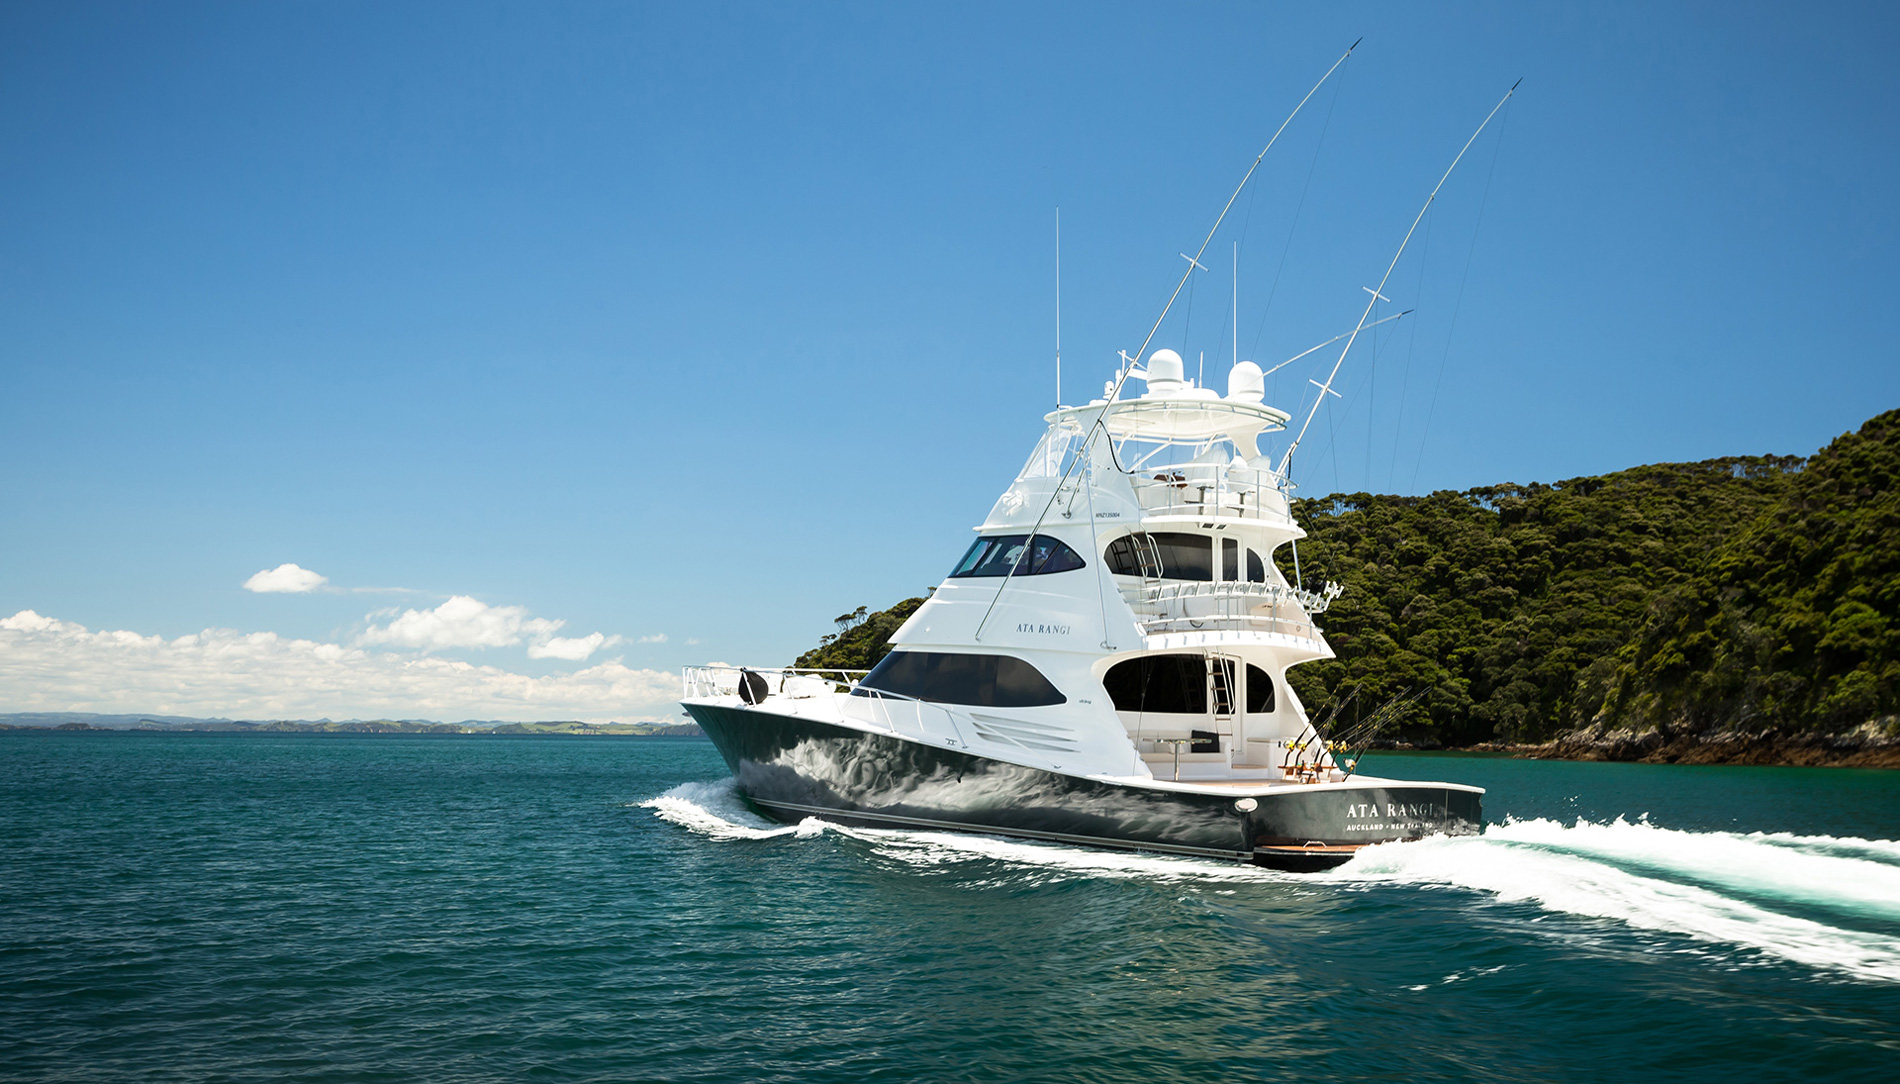 Ata Rangi, private charter boat in the Bay of Islands